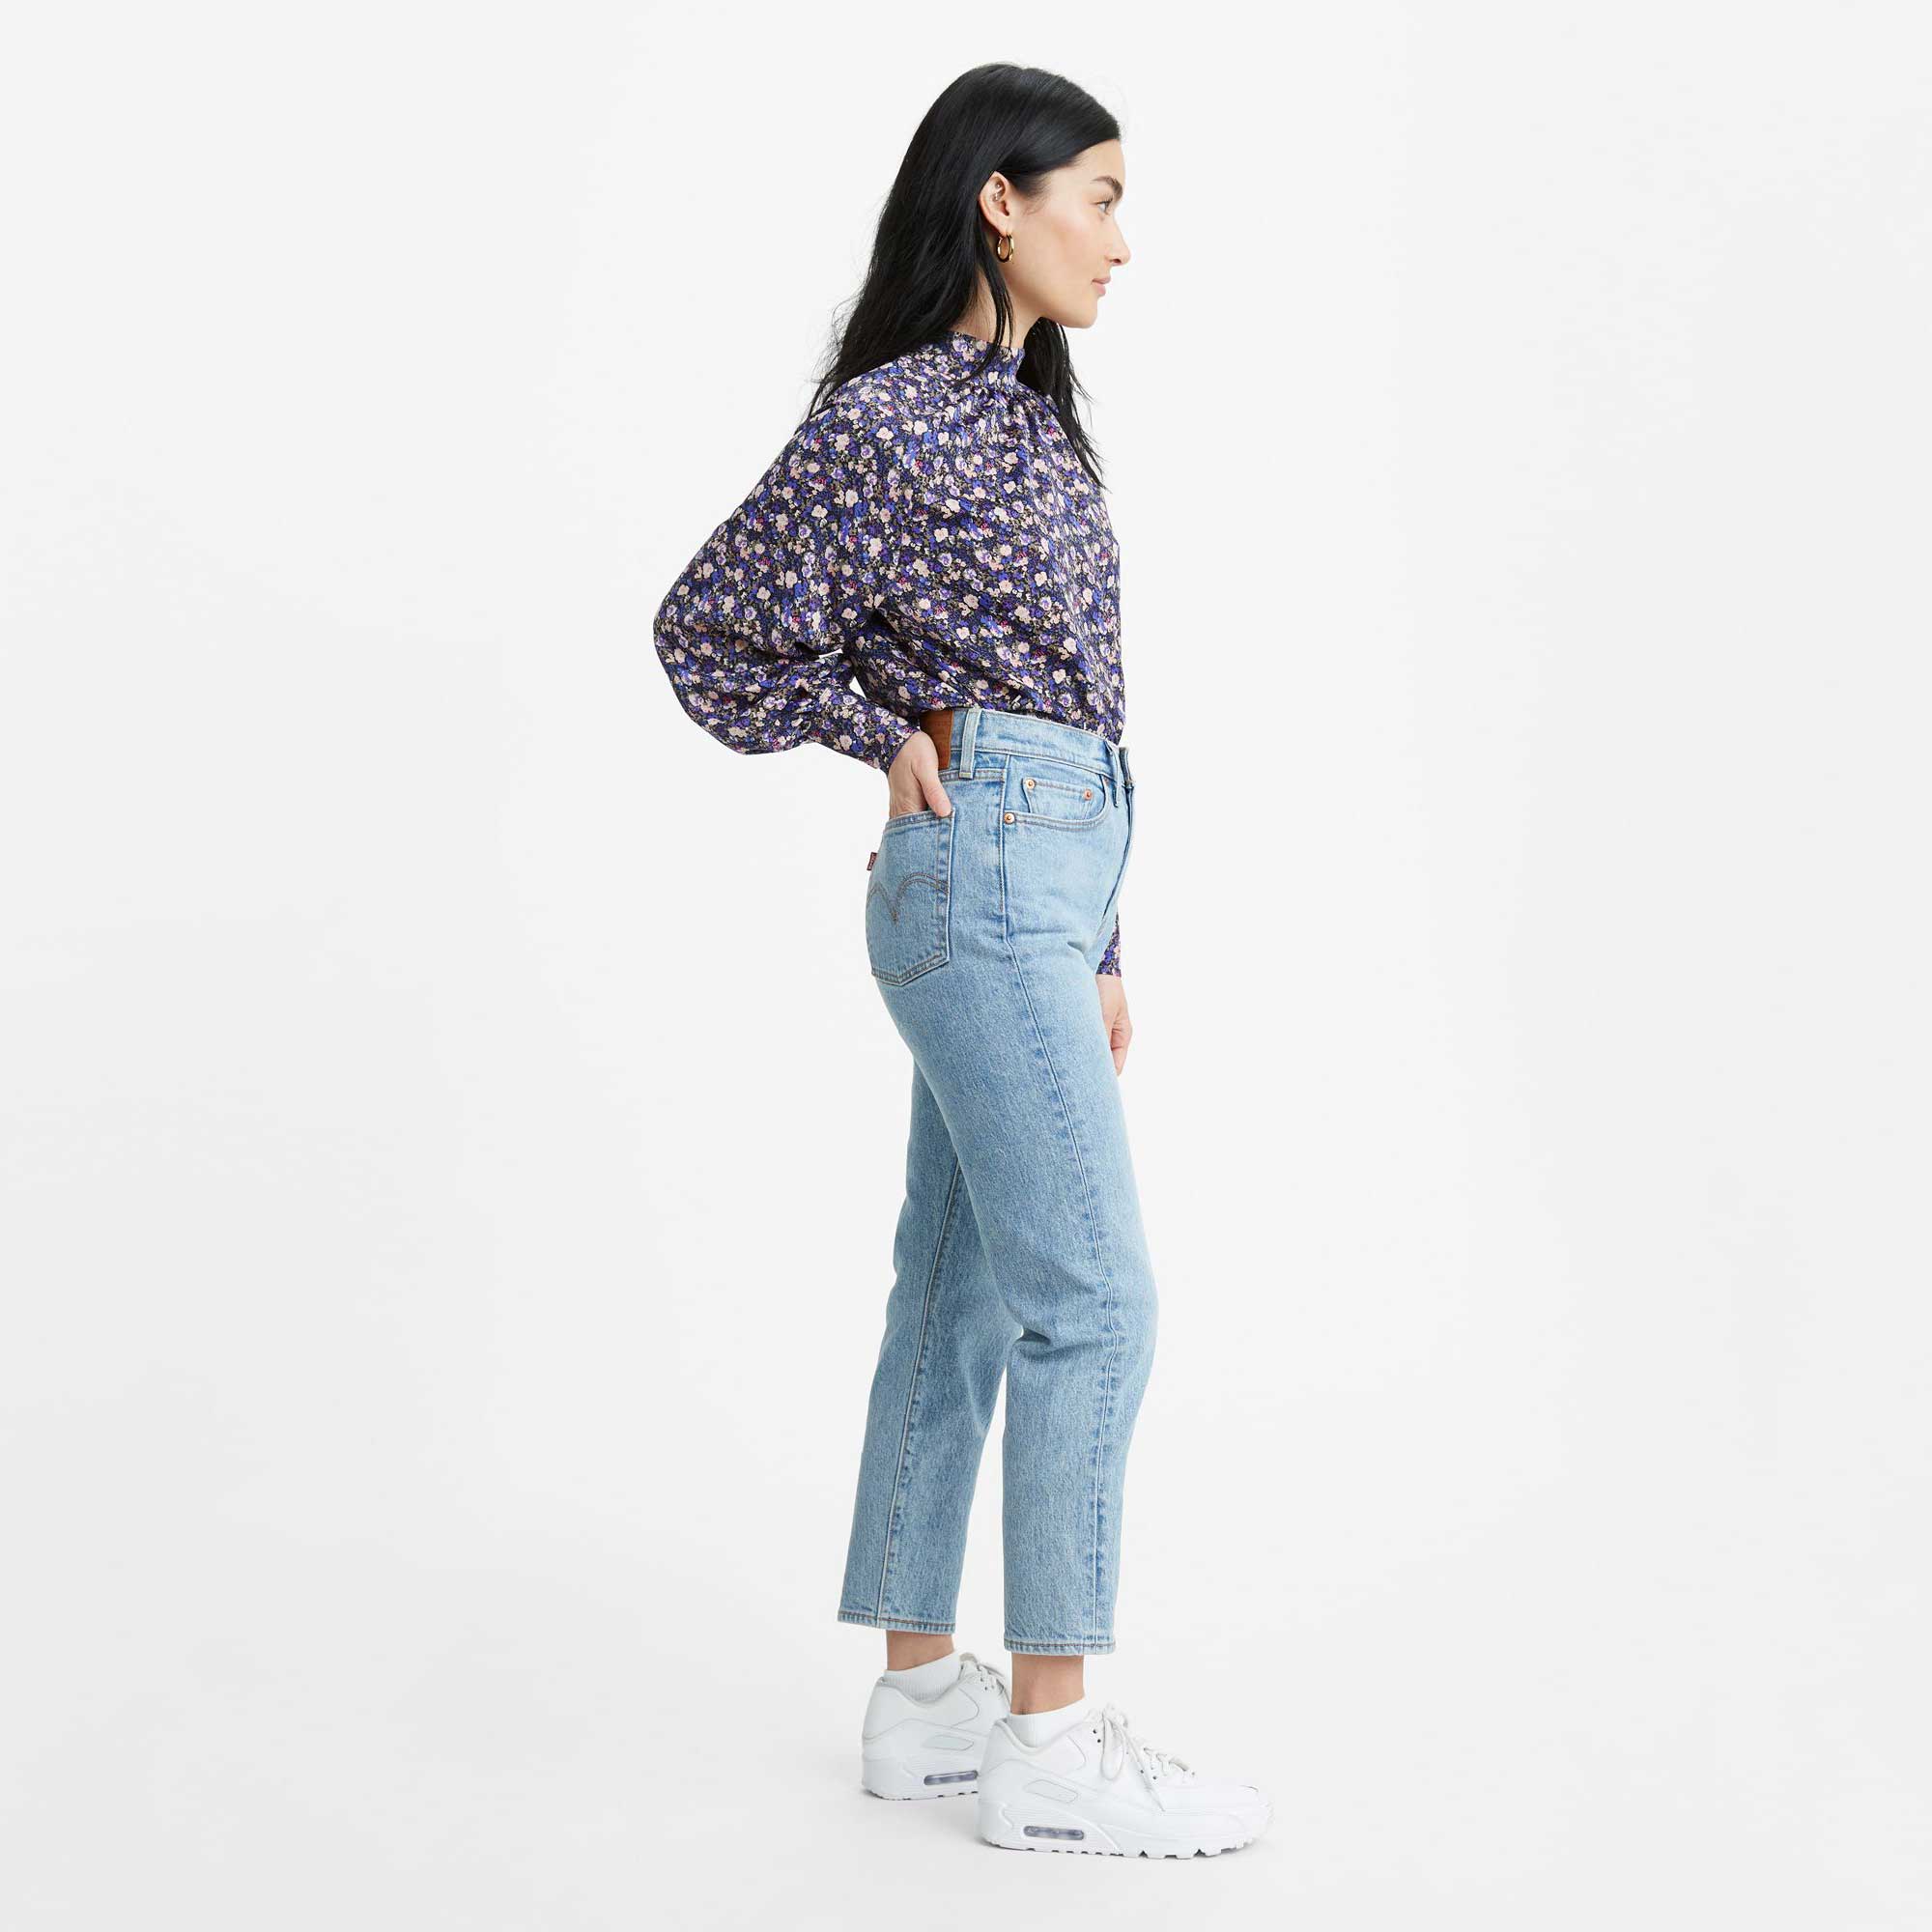 Levi's wedgie jeans…thoughts on fit? : r/PetiteFashionAdvice